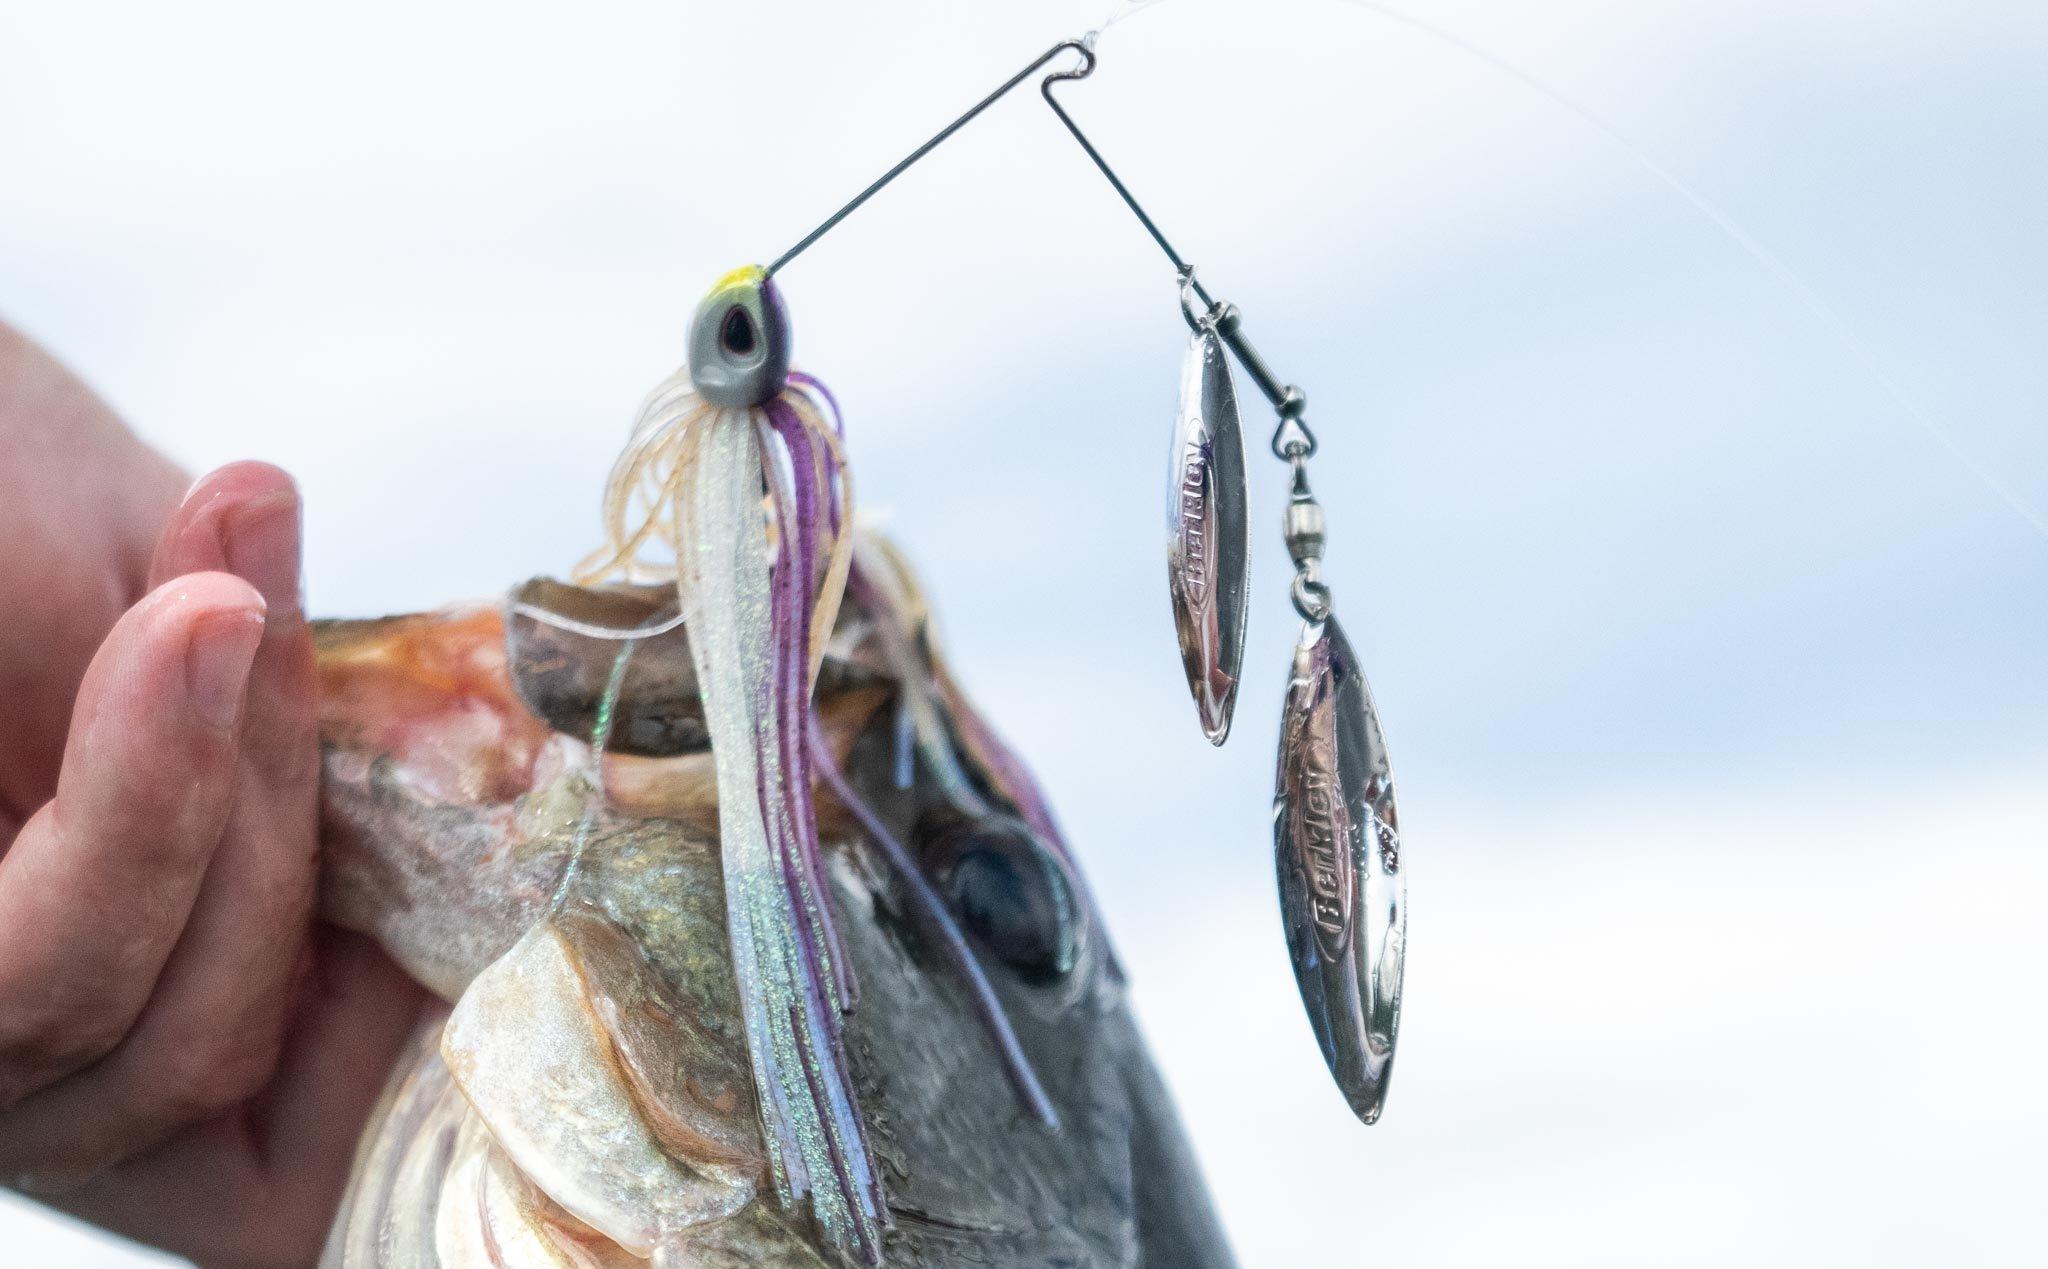 Fishing tackle from the world's most trusted fishing gear brands - Pure  Fishing